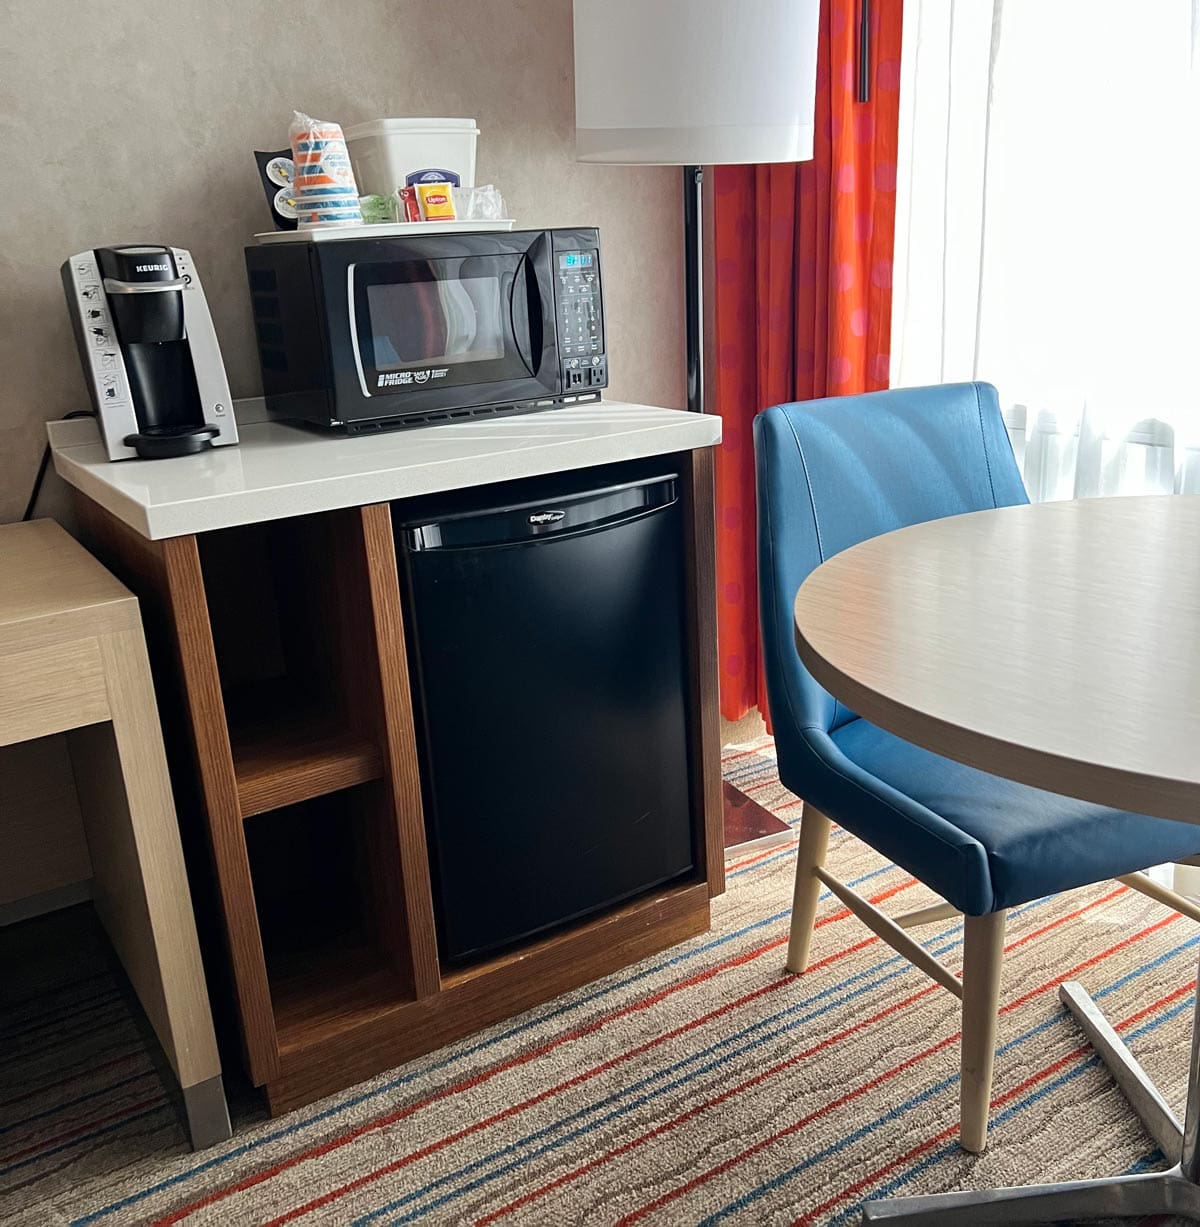 Inside a room at Howard Johnson Anaheim, featuring a small table and in-room mini fridge.